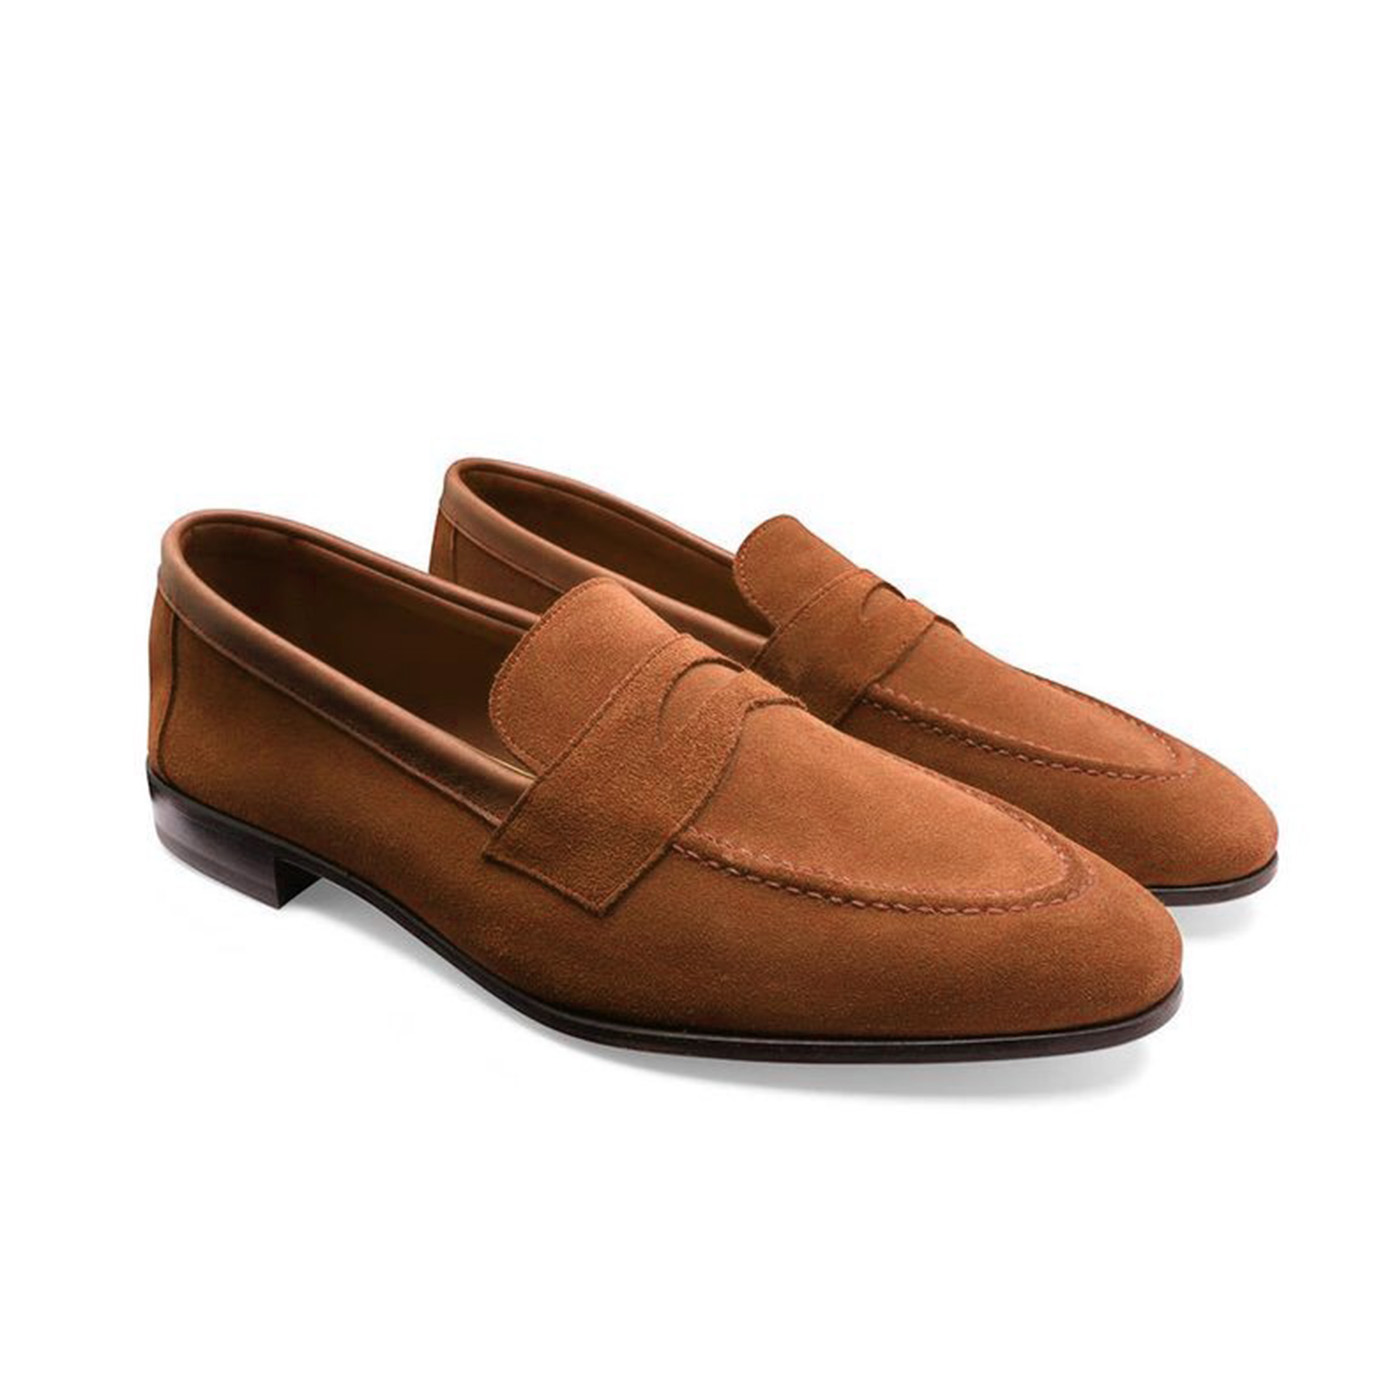 penny loafers (2)